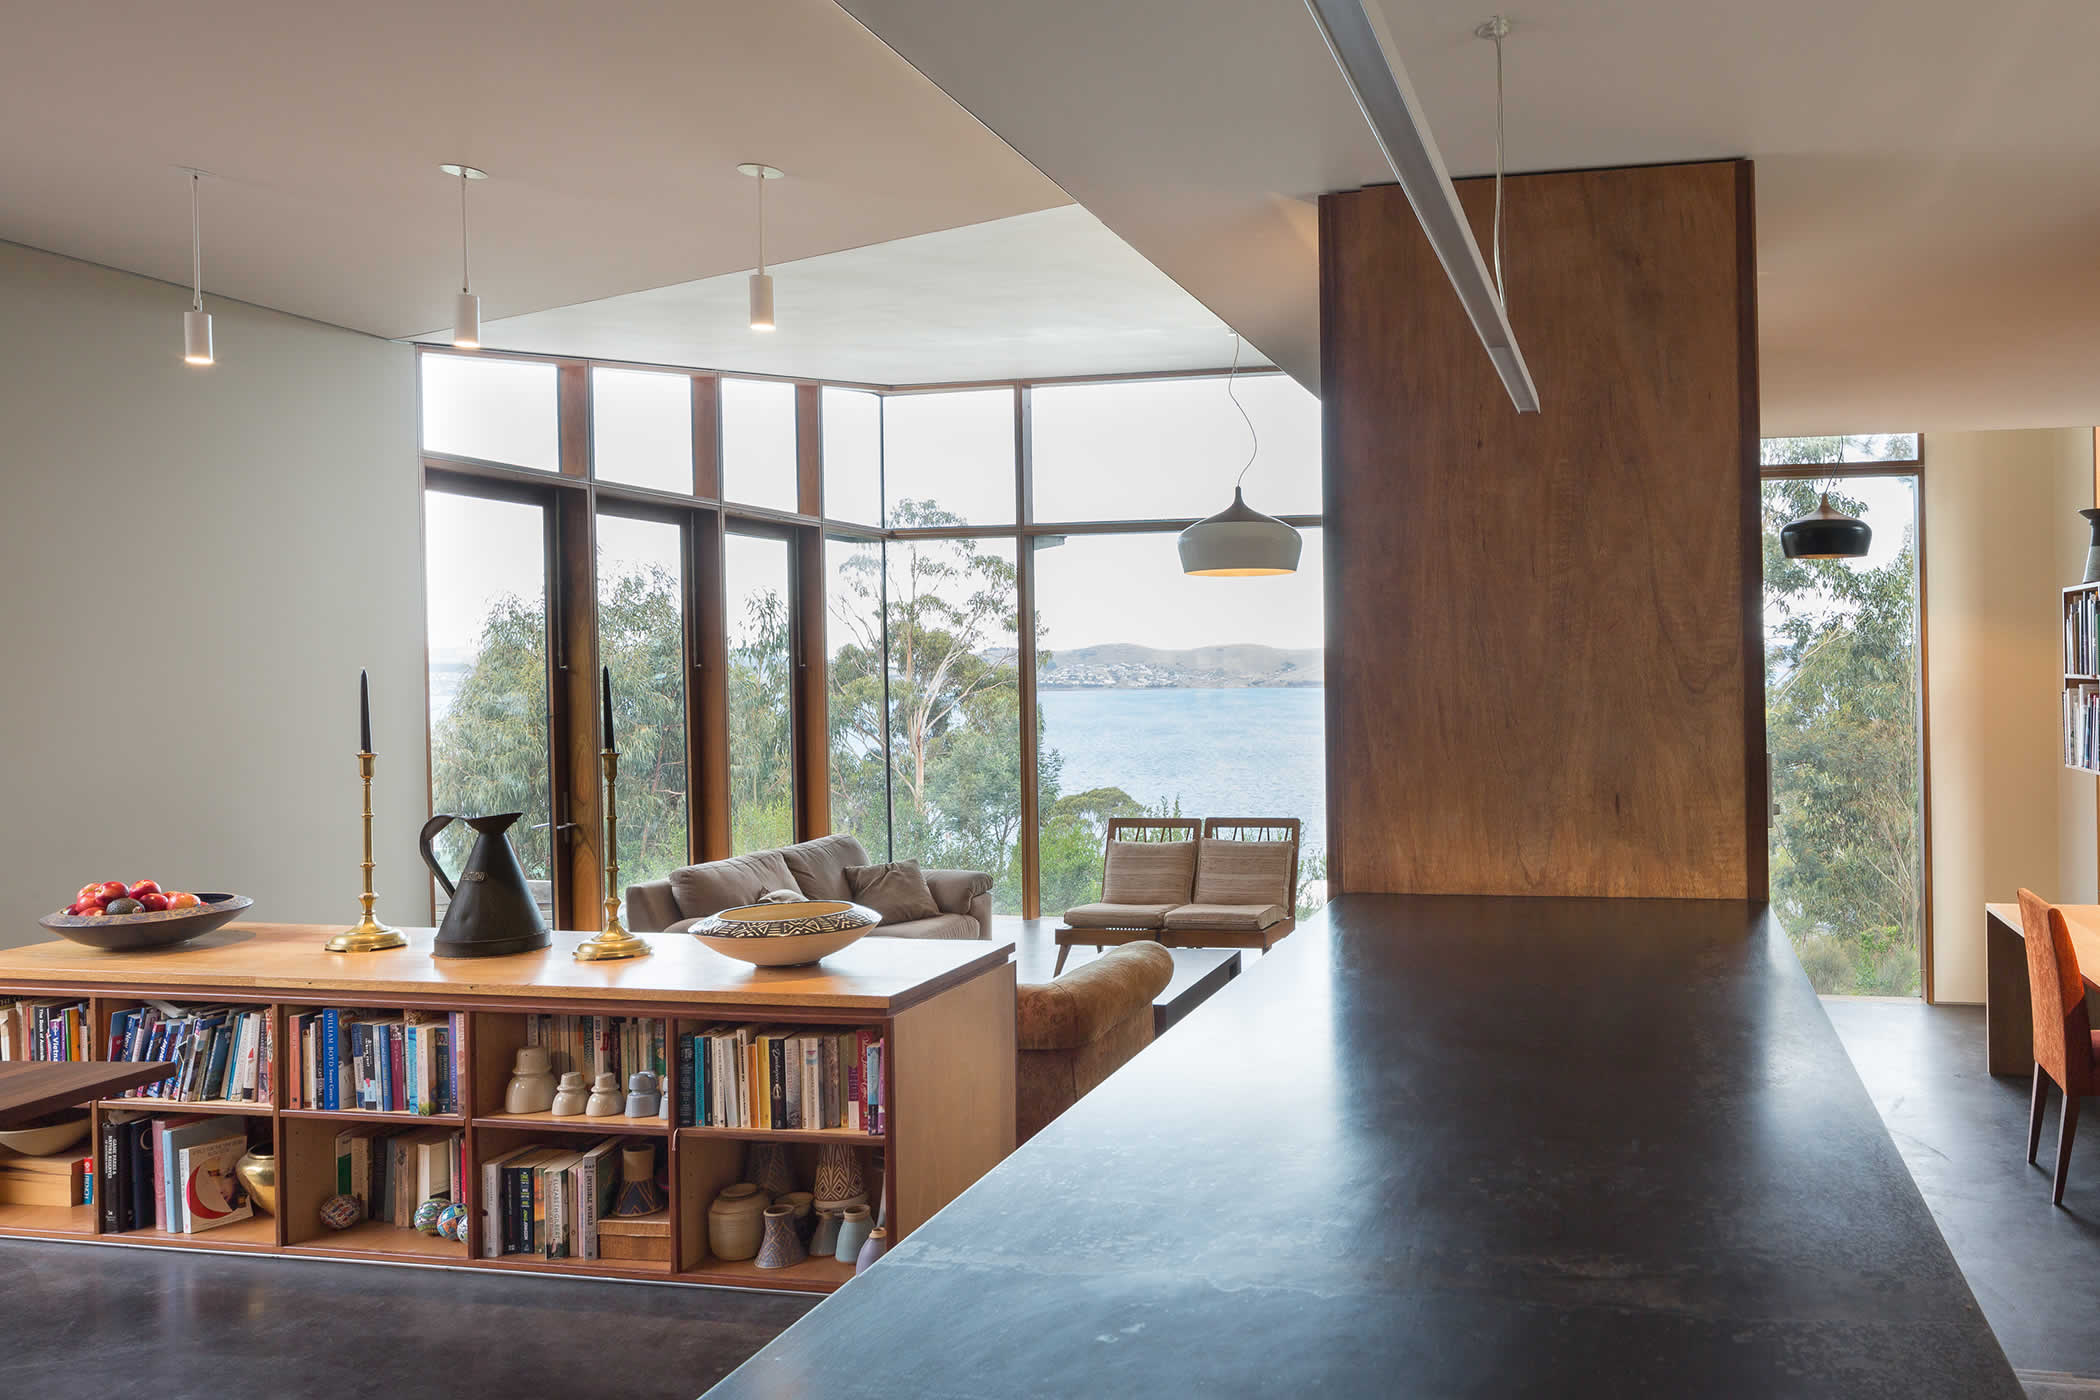 Sandy Bay, Tasmania: The main pavilion opens to the courtyards and different views. Floor and ceiling levels, alcoves and clever storage define interlinked dining, living, study, kitchen and pantry / laundry space. Photo by Thomas Ryan.